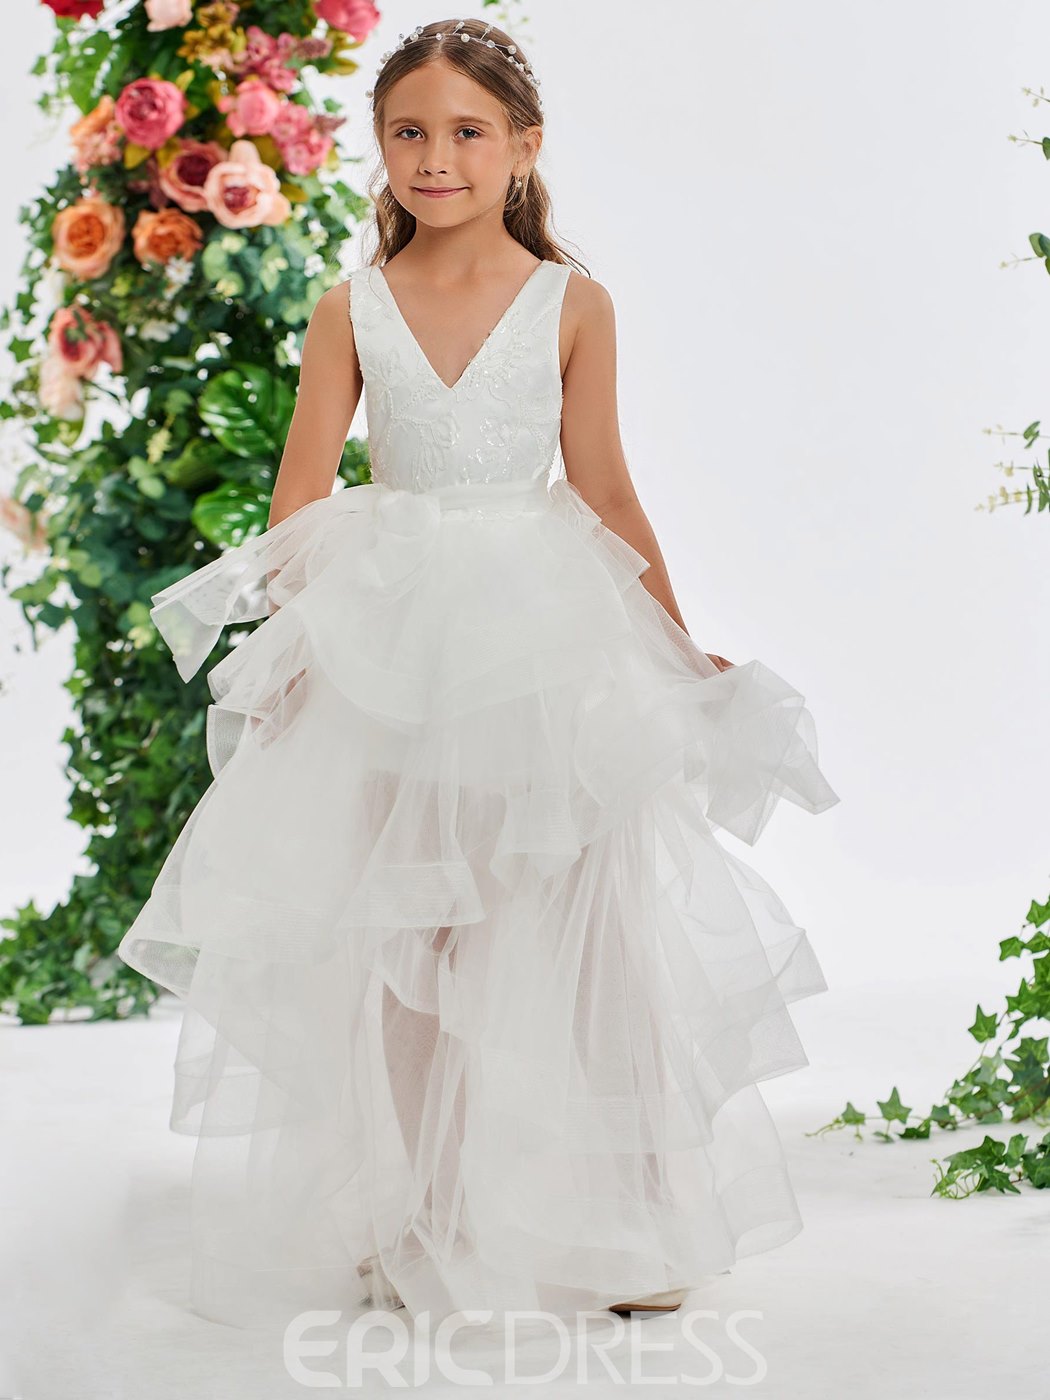 Flower girl dress with multi-tiered skirt